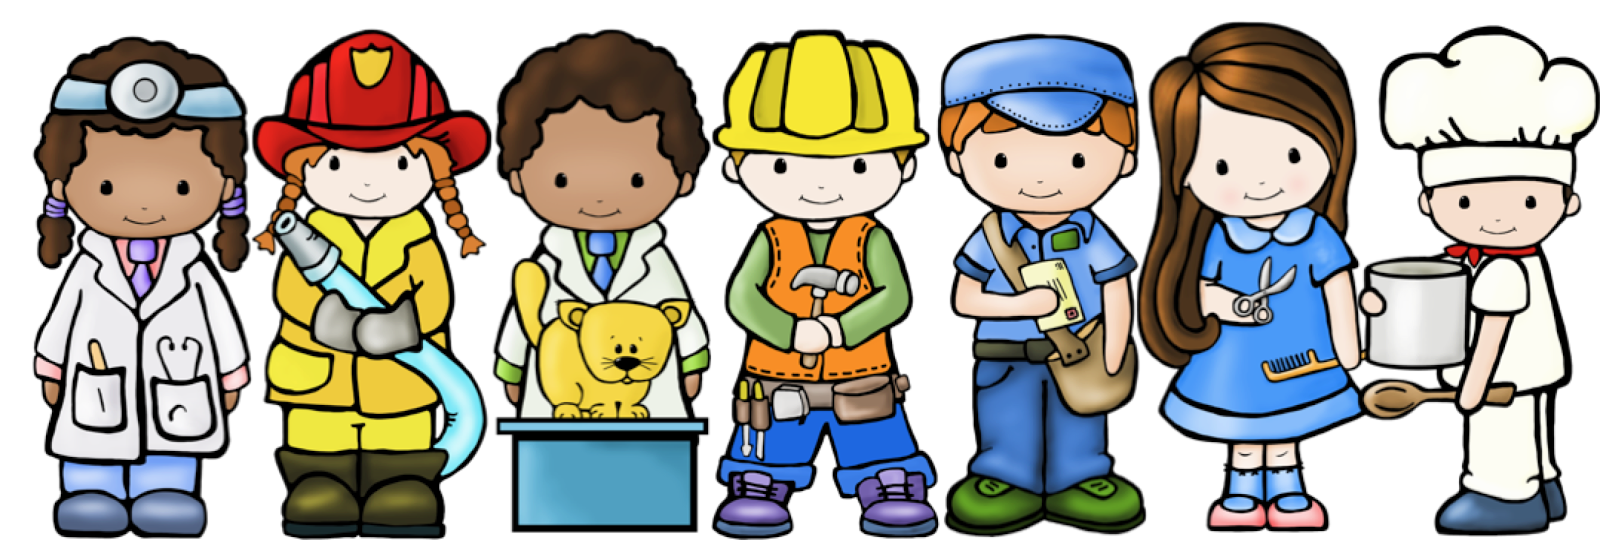 Community Helpers Clipart - Community Helpers Clipart